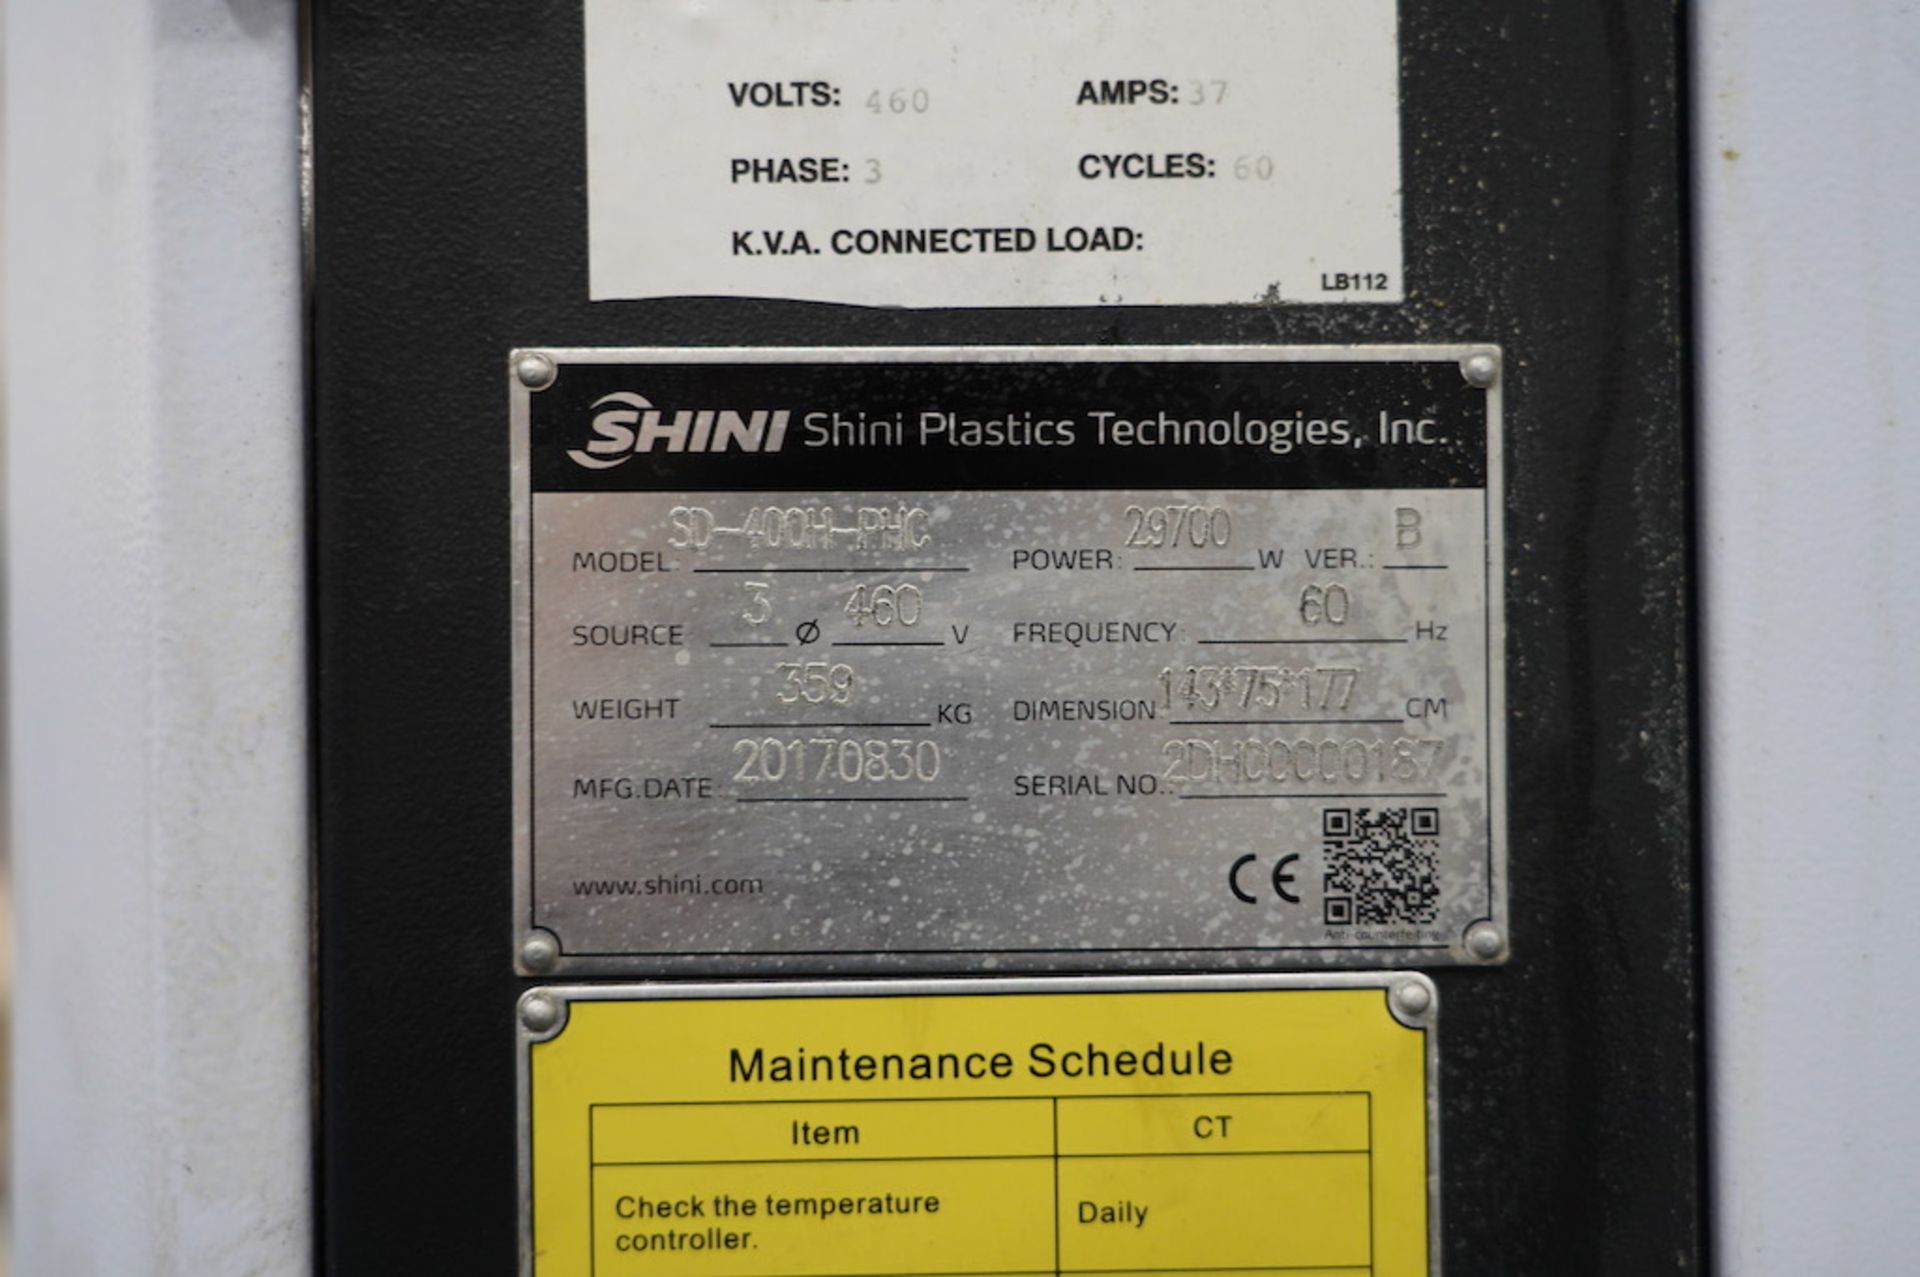 Shini SD-400H-PHC Material Dryer, New in 2017 - Image 6 of 6